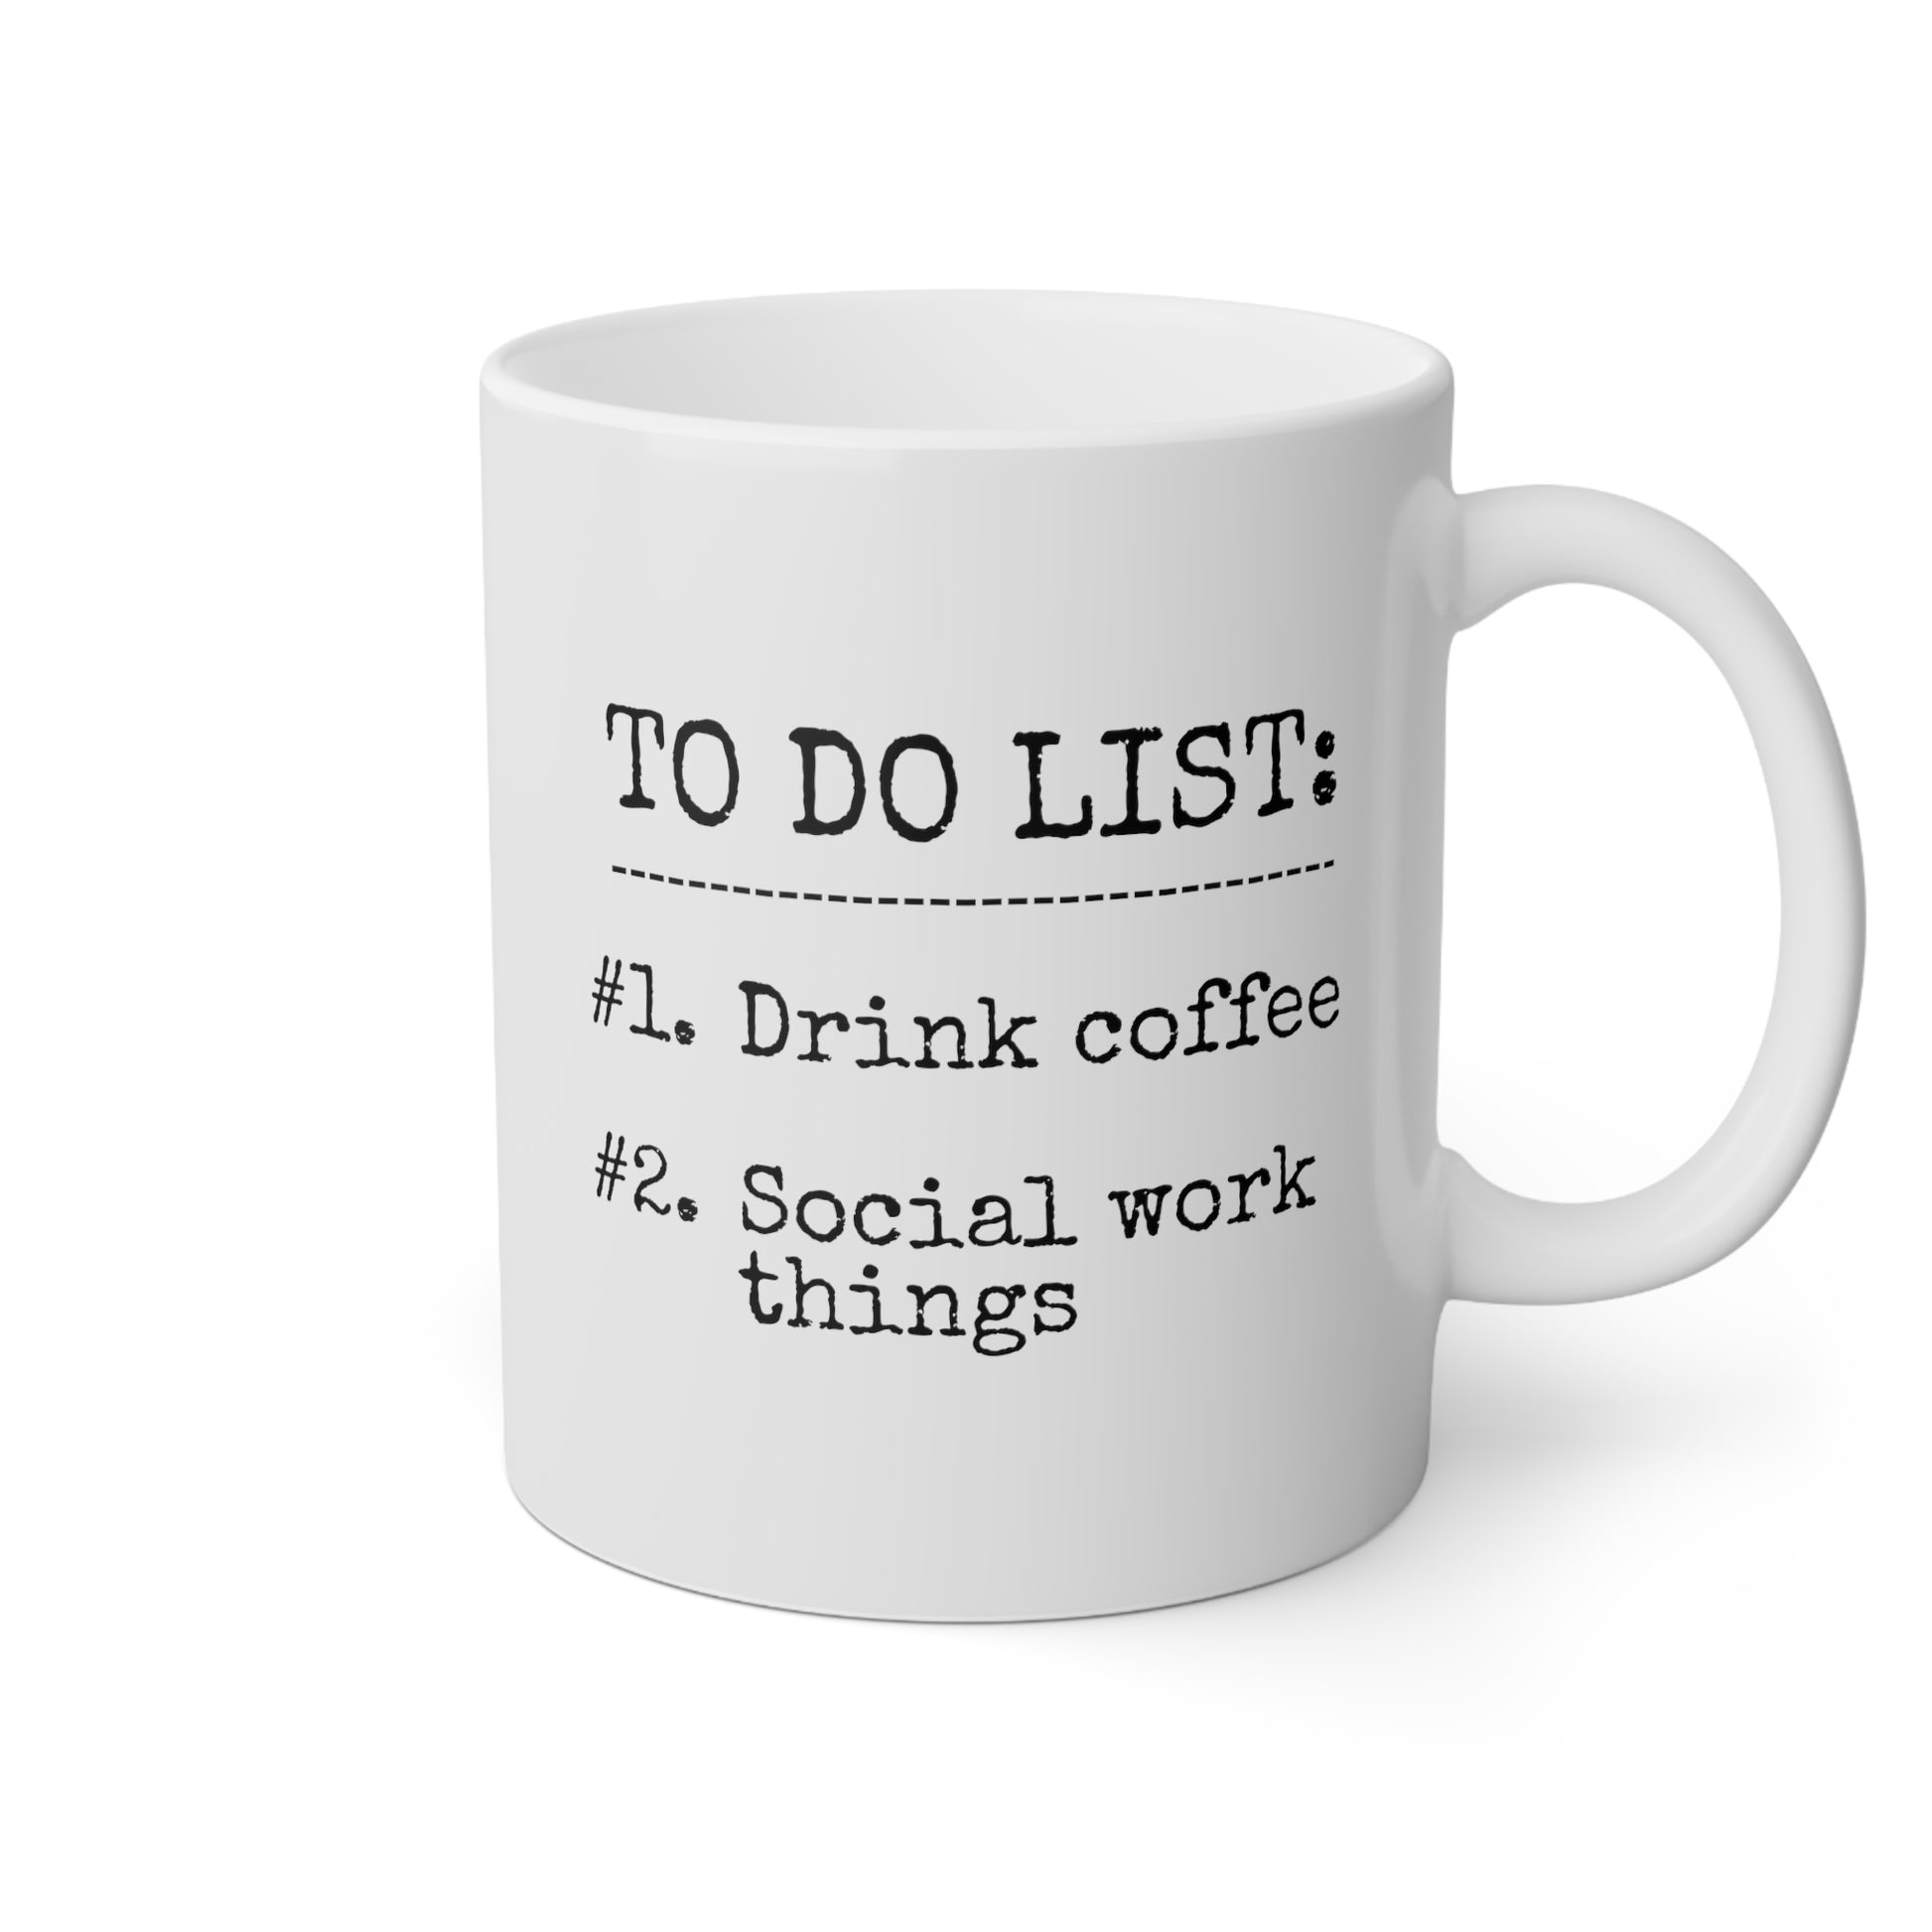 To Do List Drink Coffee Social Work Things 11oz white funny large coffee mug gift for social worker graduation firstlover doxie waveywares wavey wares wavywares wavy wares